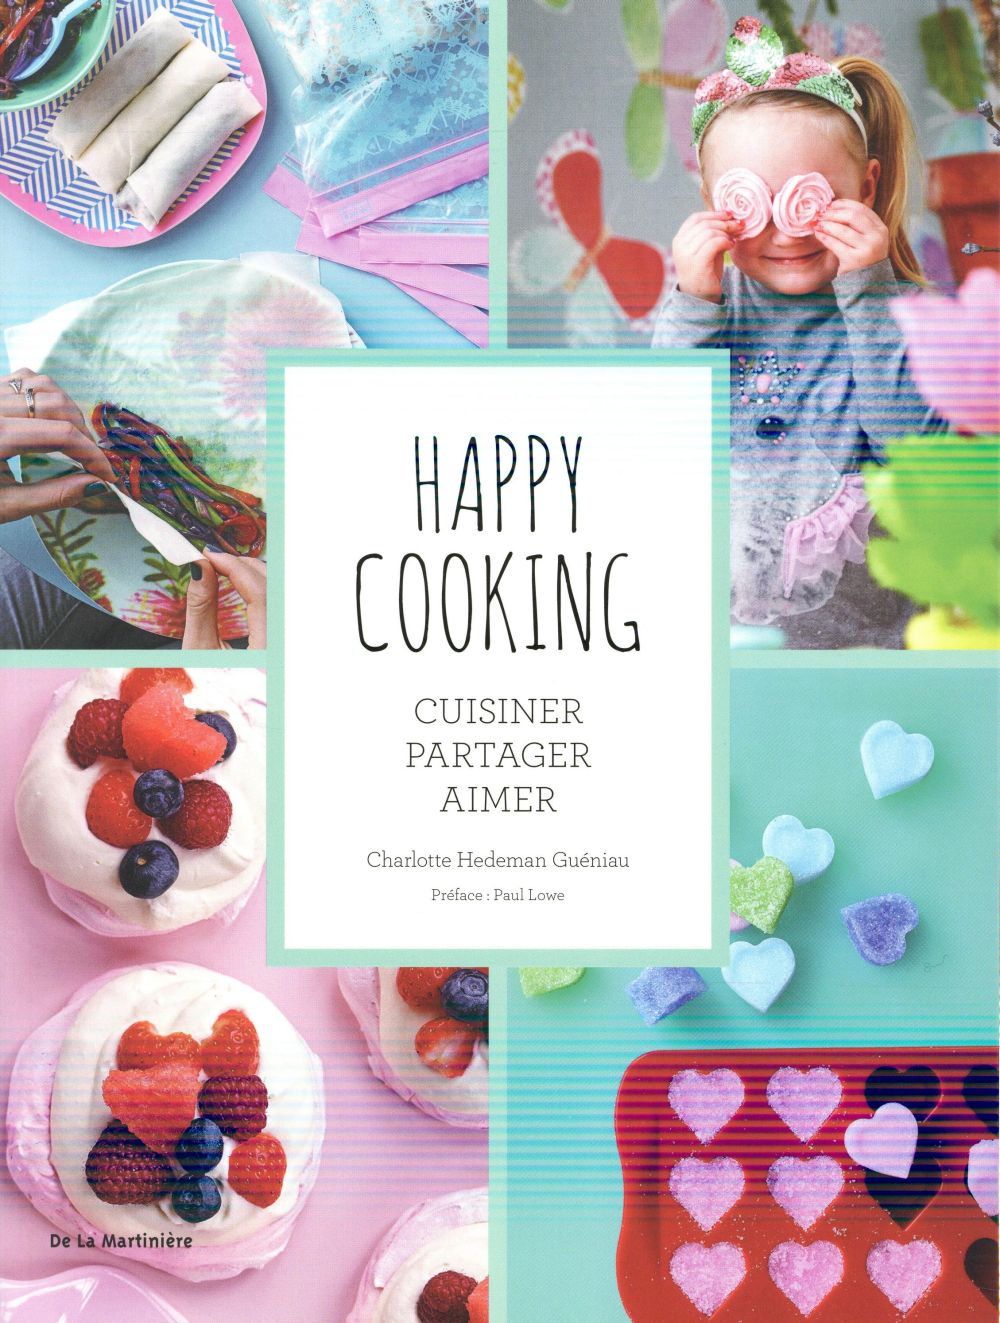 HAPPY COOKING. CUISINER, PARTAGER, AIMER